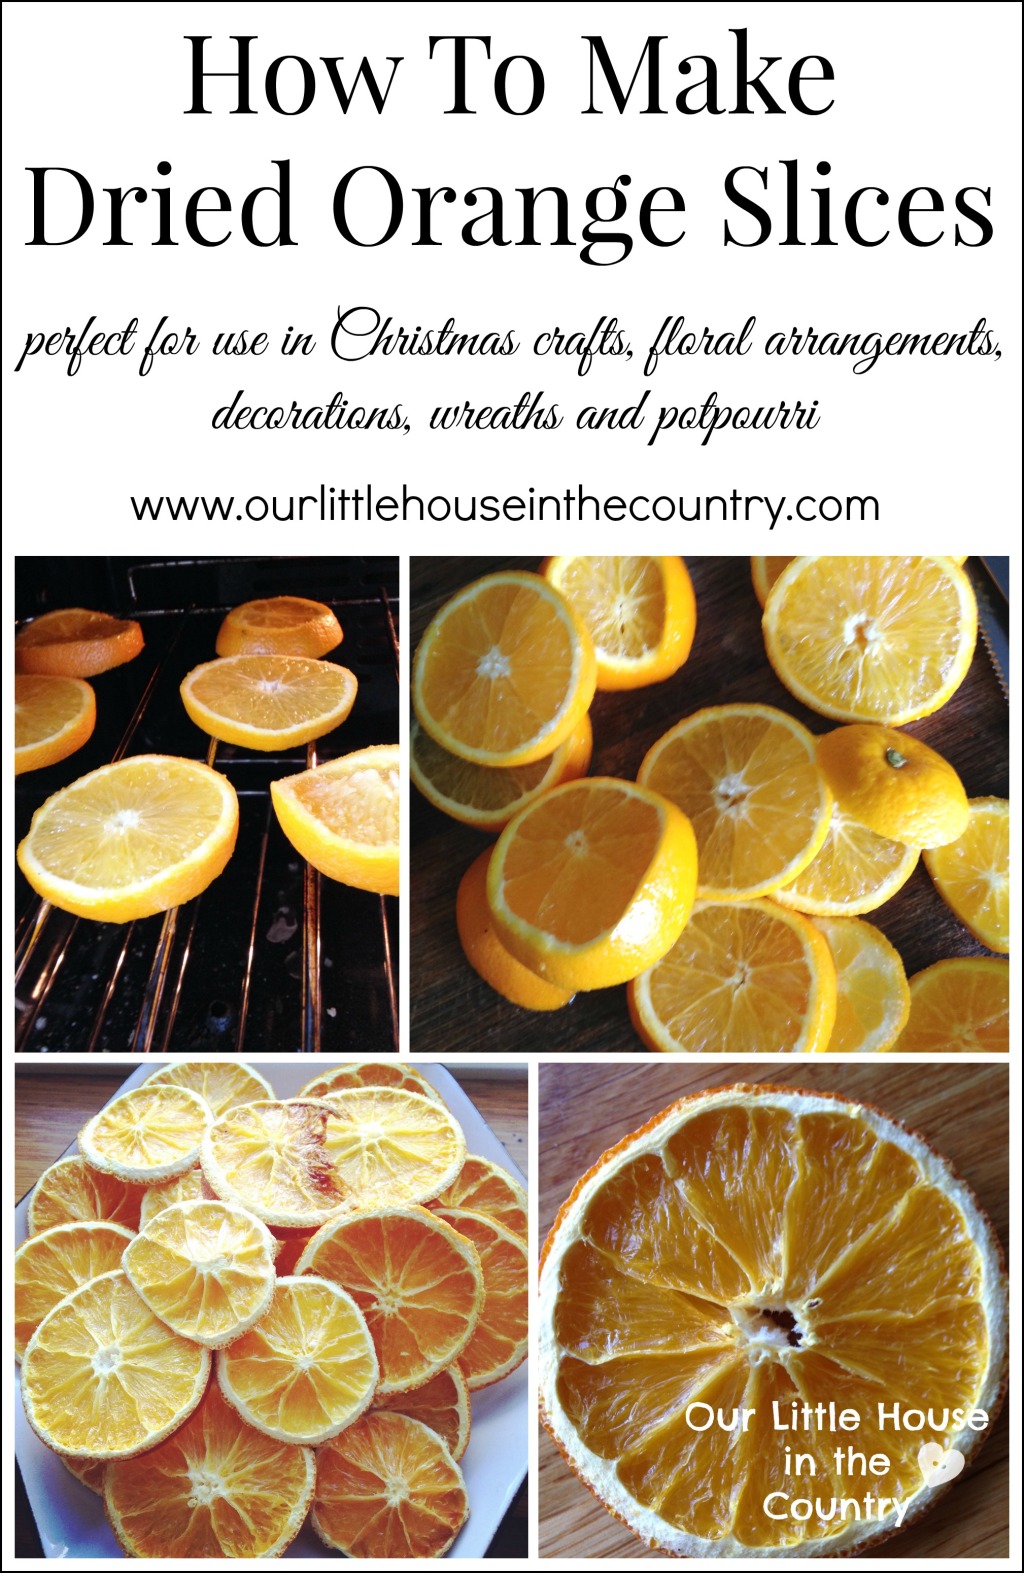 How to Make Dried Orange Slices - Perfect for use in Christmas crafts, wreaths, decorations and floral arrangements - Our Little House in the Country 1